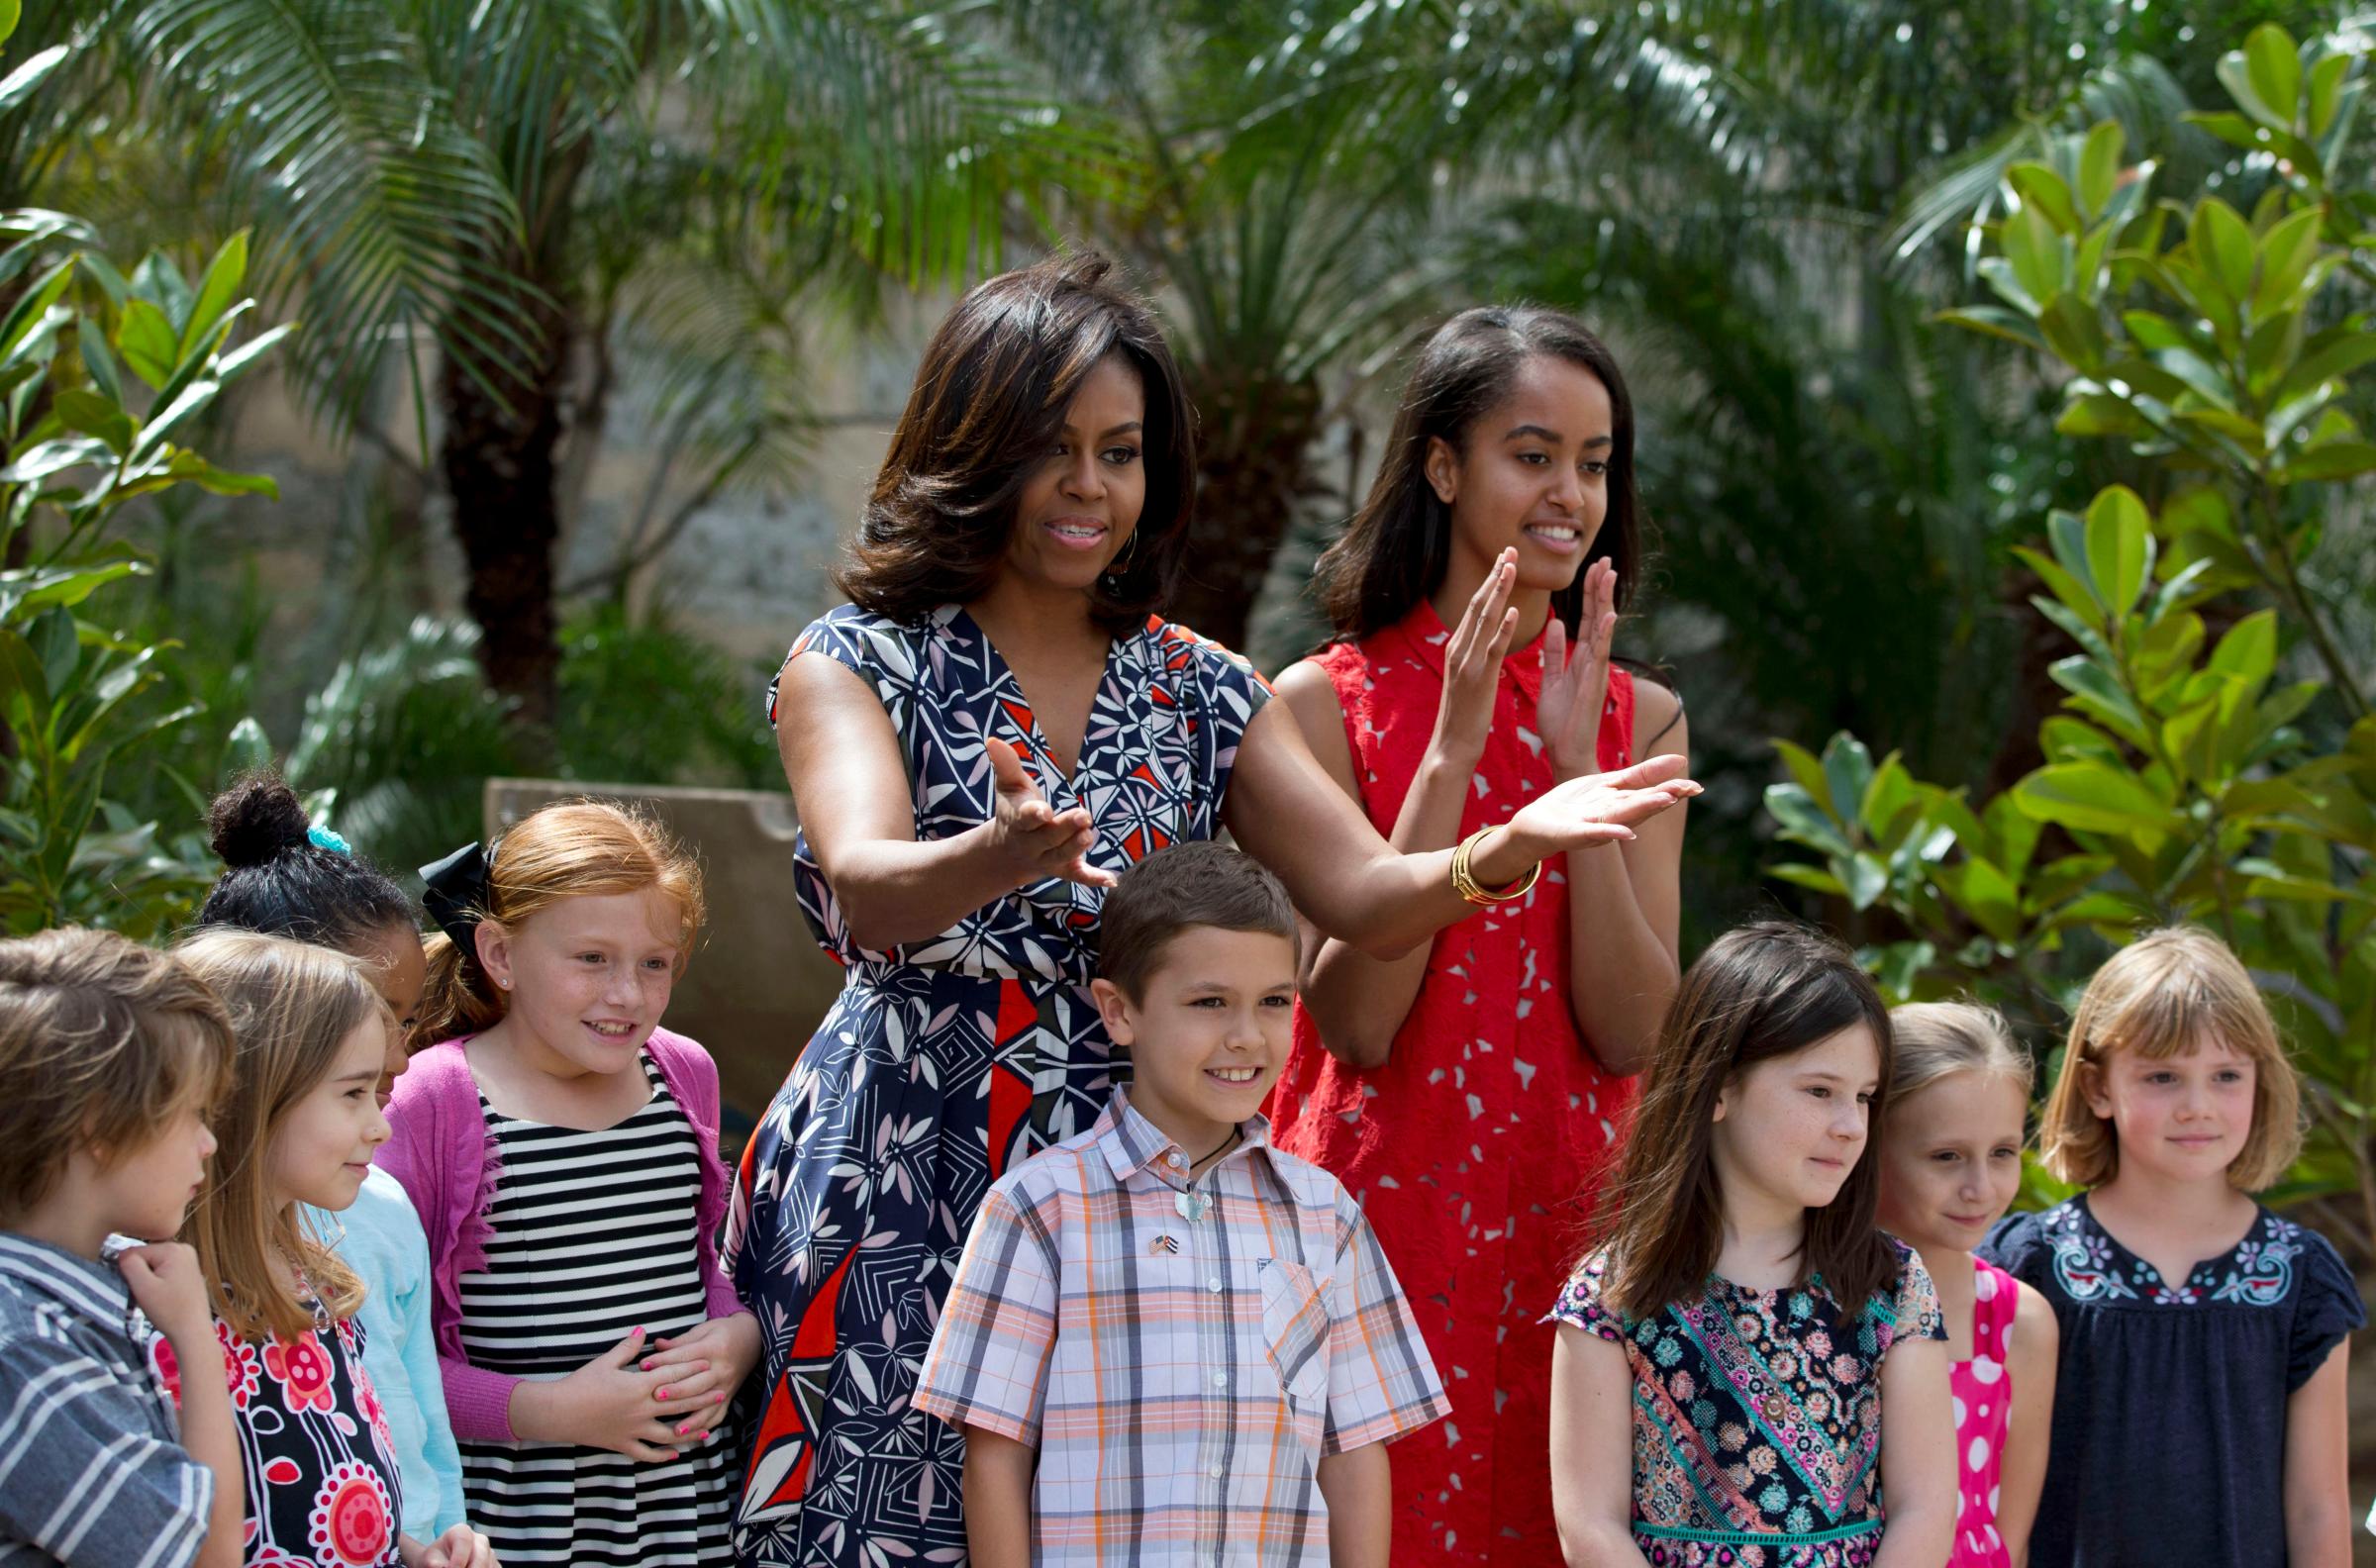 March 22, 2016 First Lady Michelle Obama thanks embassy workers with her daughter Malia after dedicating two magnolia trees and a bench, at a small park in Plaza de las Armas, Old Havana, Cuba.